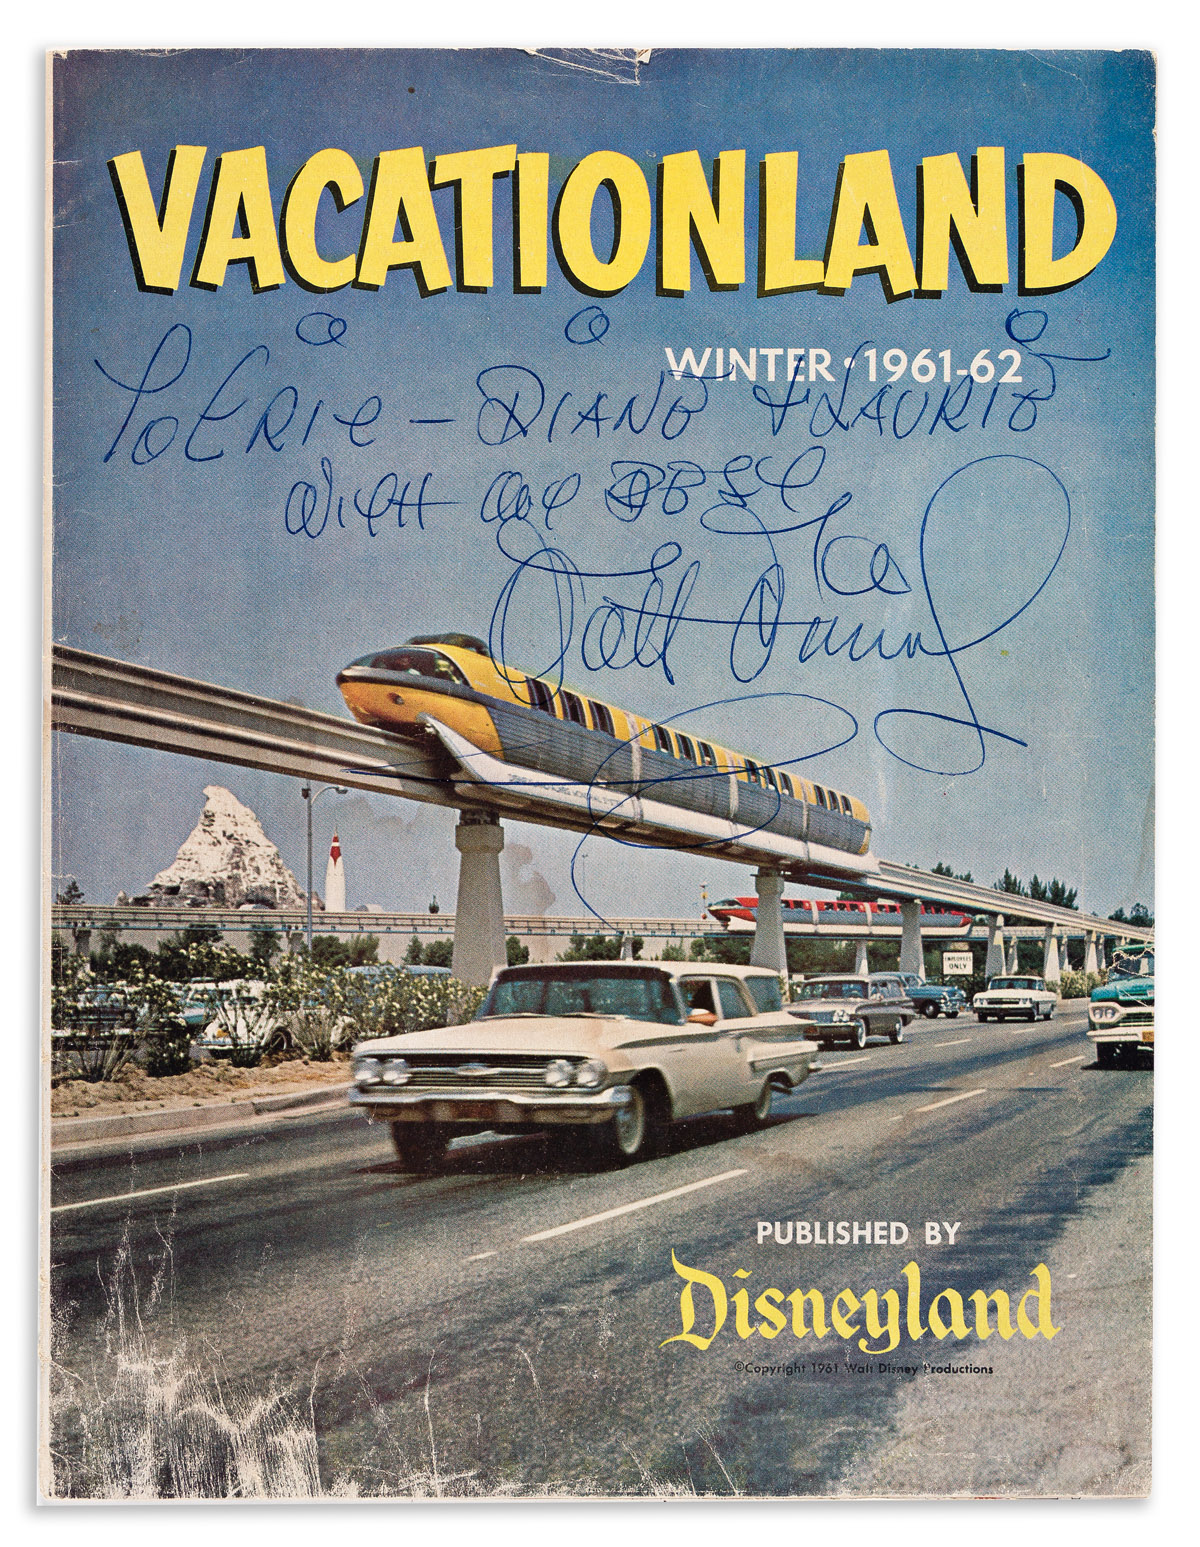 DISNEY, WALT. Complete 1961 Vactionland magazine Signed and Inscribed, To Eric -- Diane & Laurie / With my best,